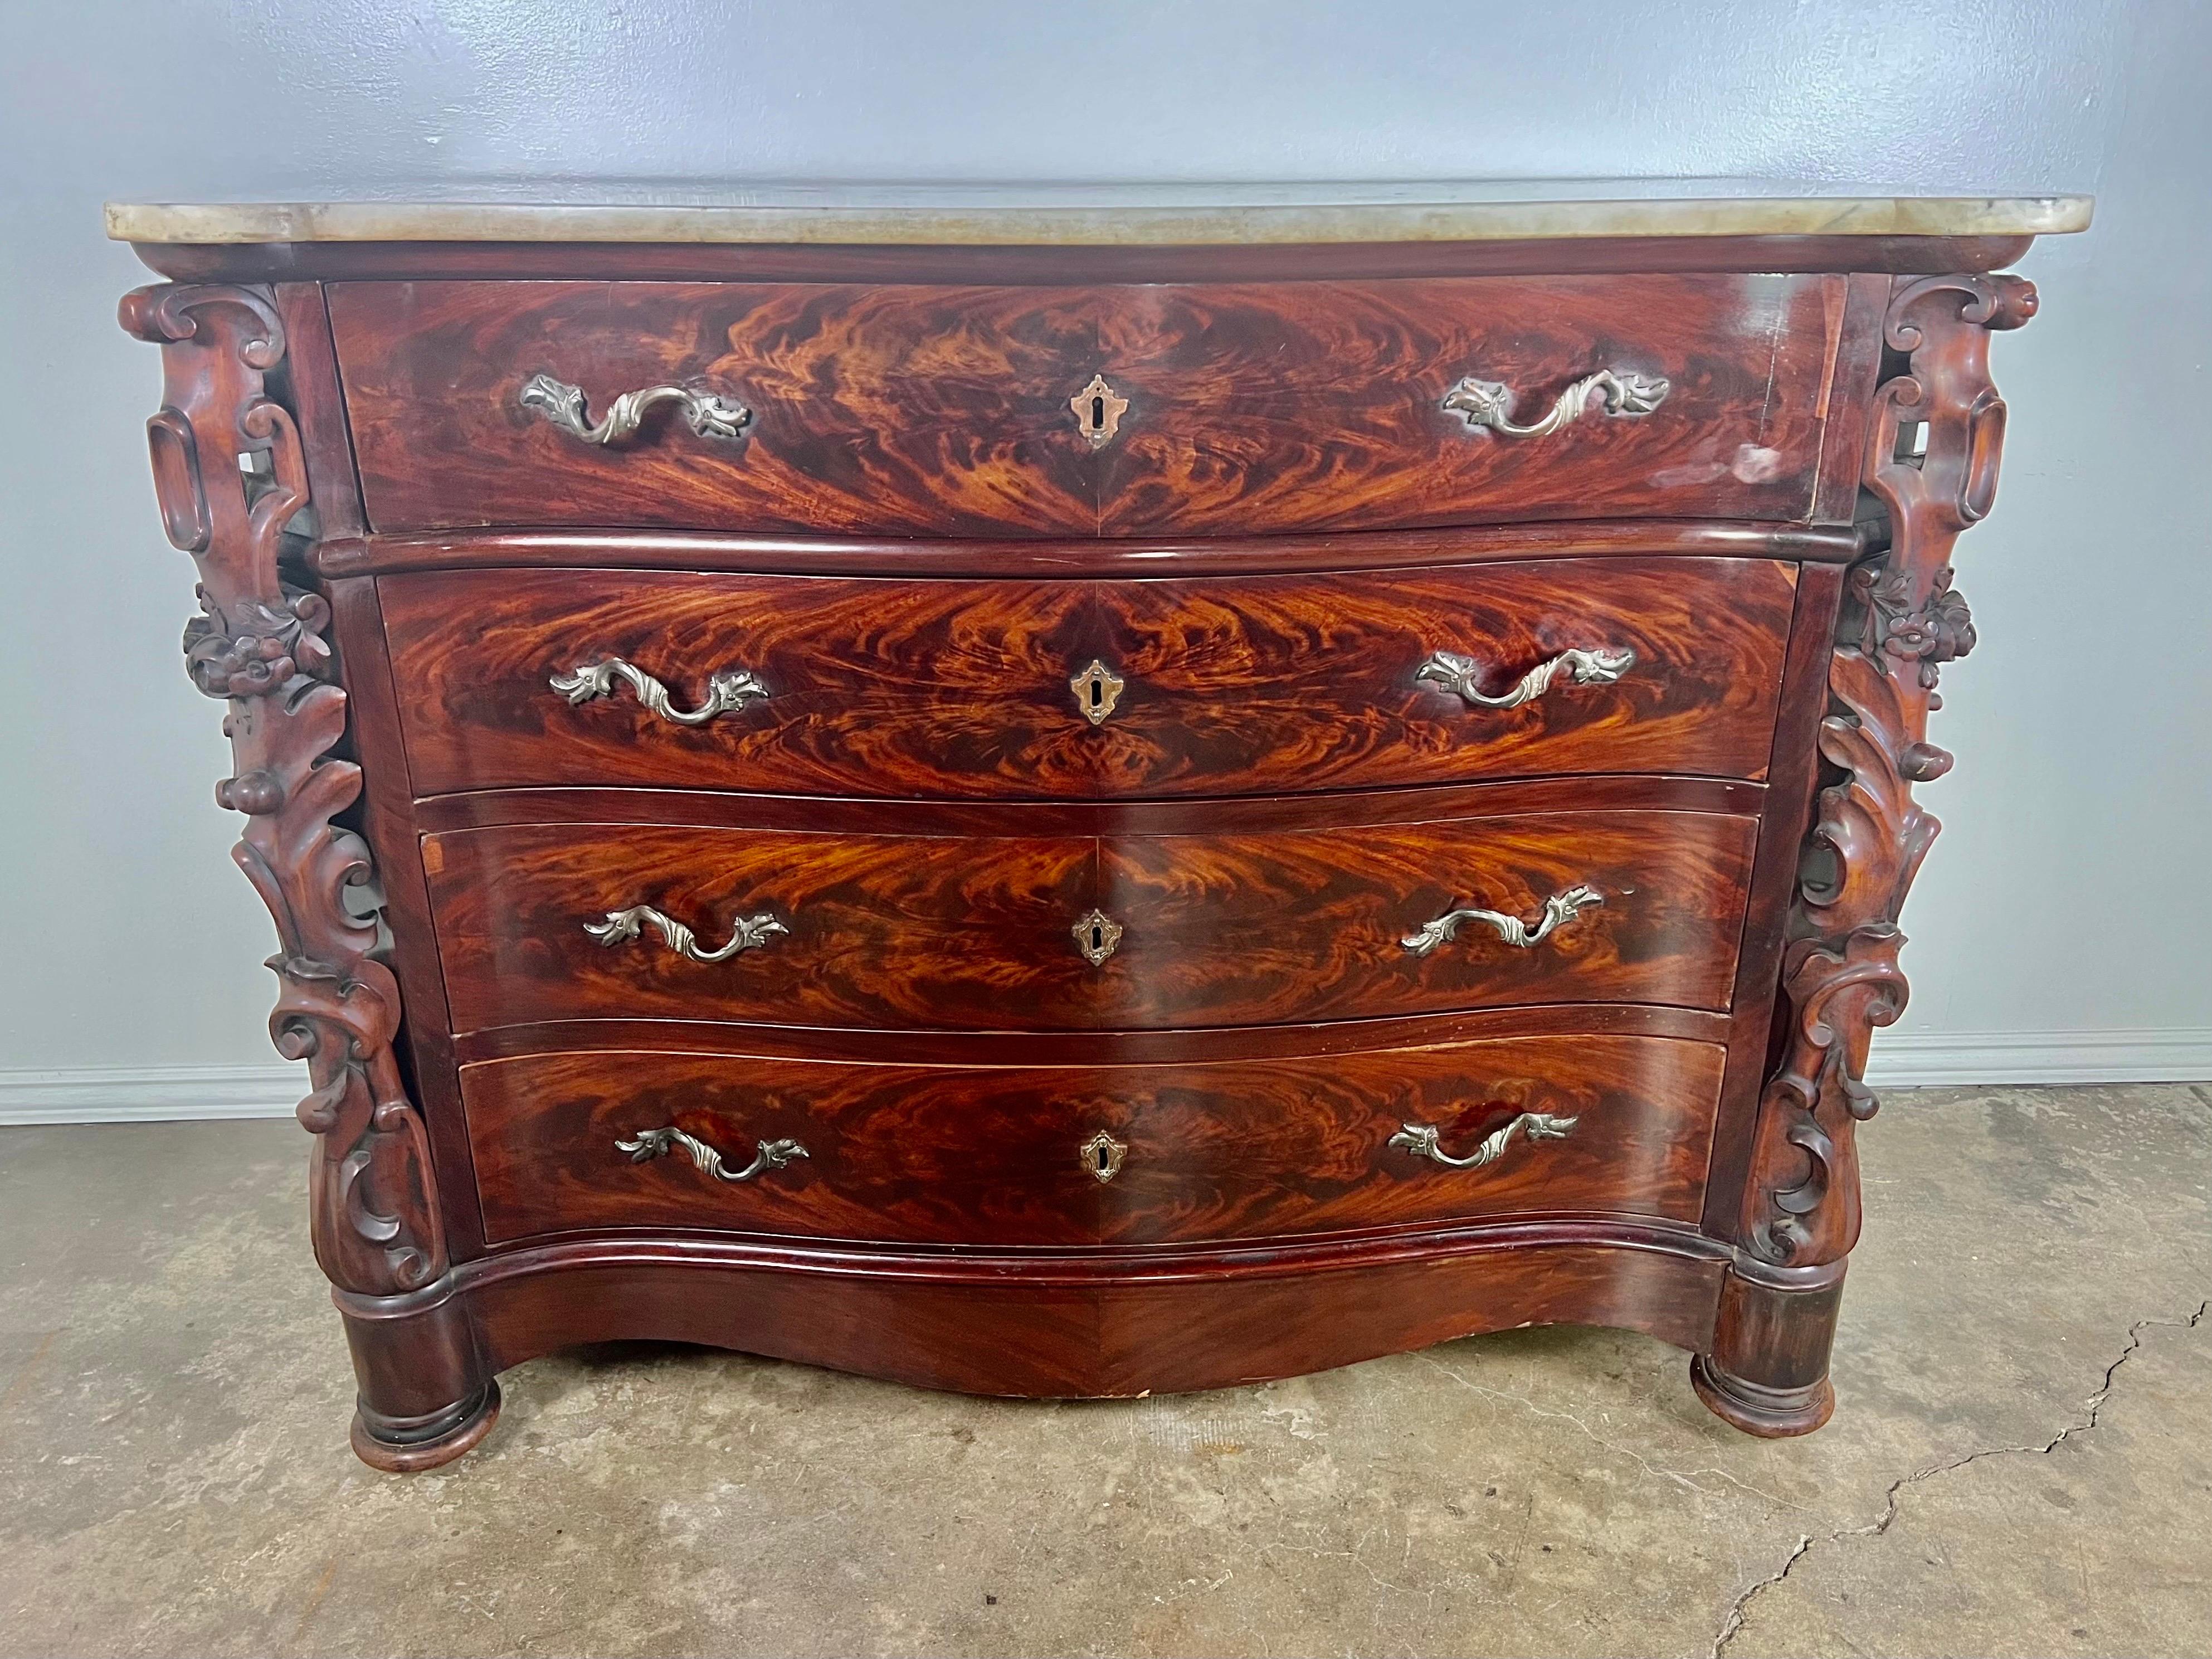 19th century English feathered mahogany chest of drawers. There are finely carved panels flanking the chest that depict leaves, flowers, and acanthus leaves. 
There are four drawer with plenty of storage. The chest stands on four bun  feet. The